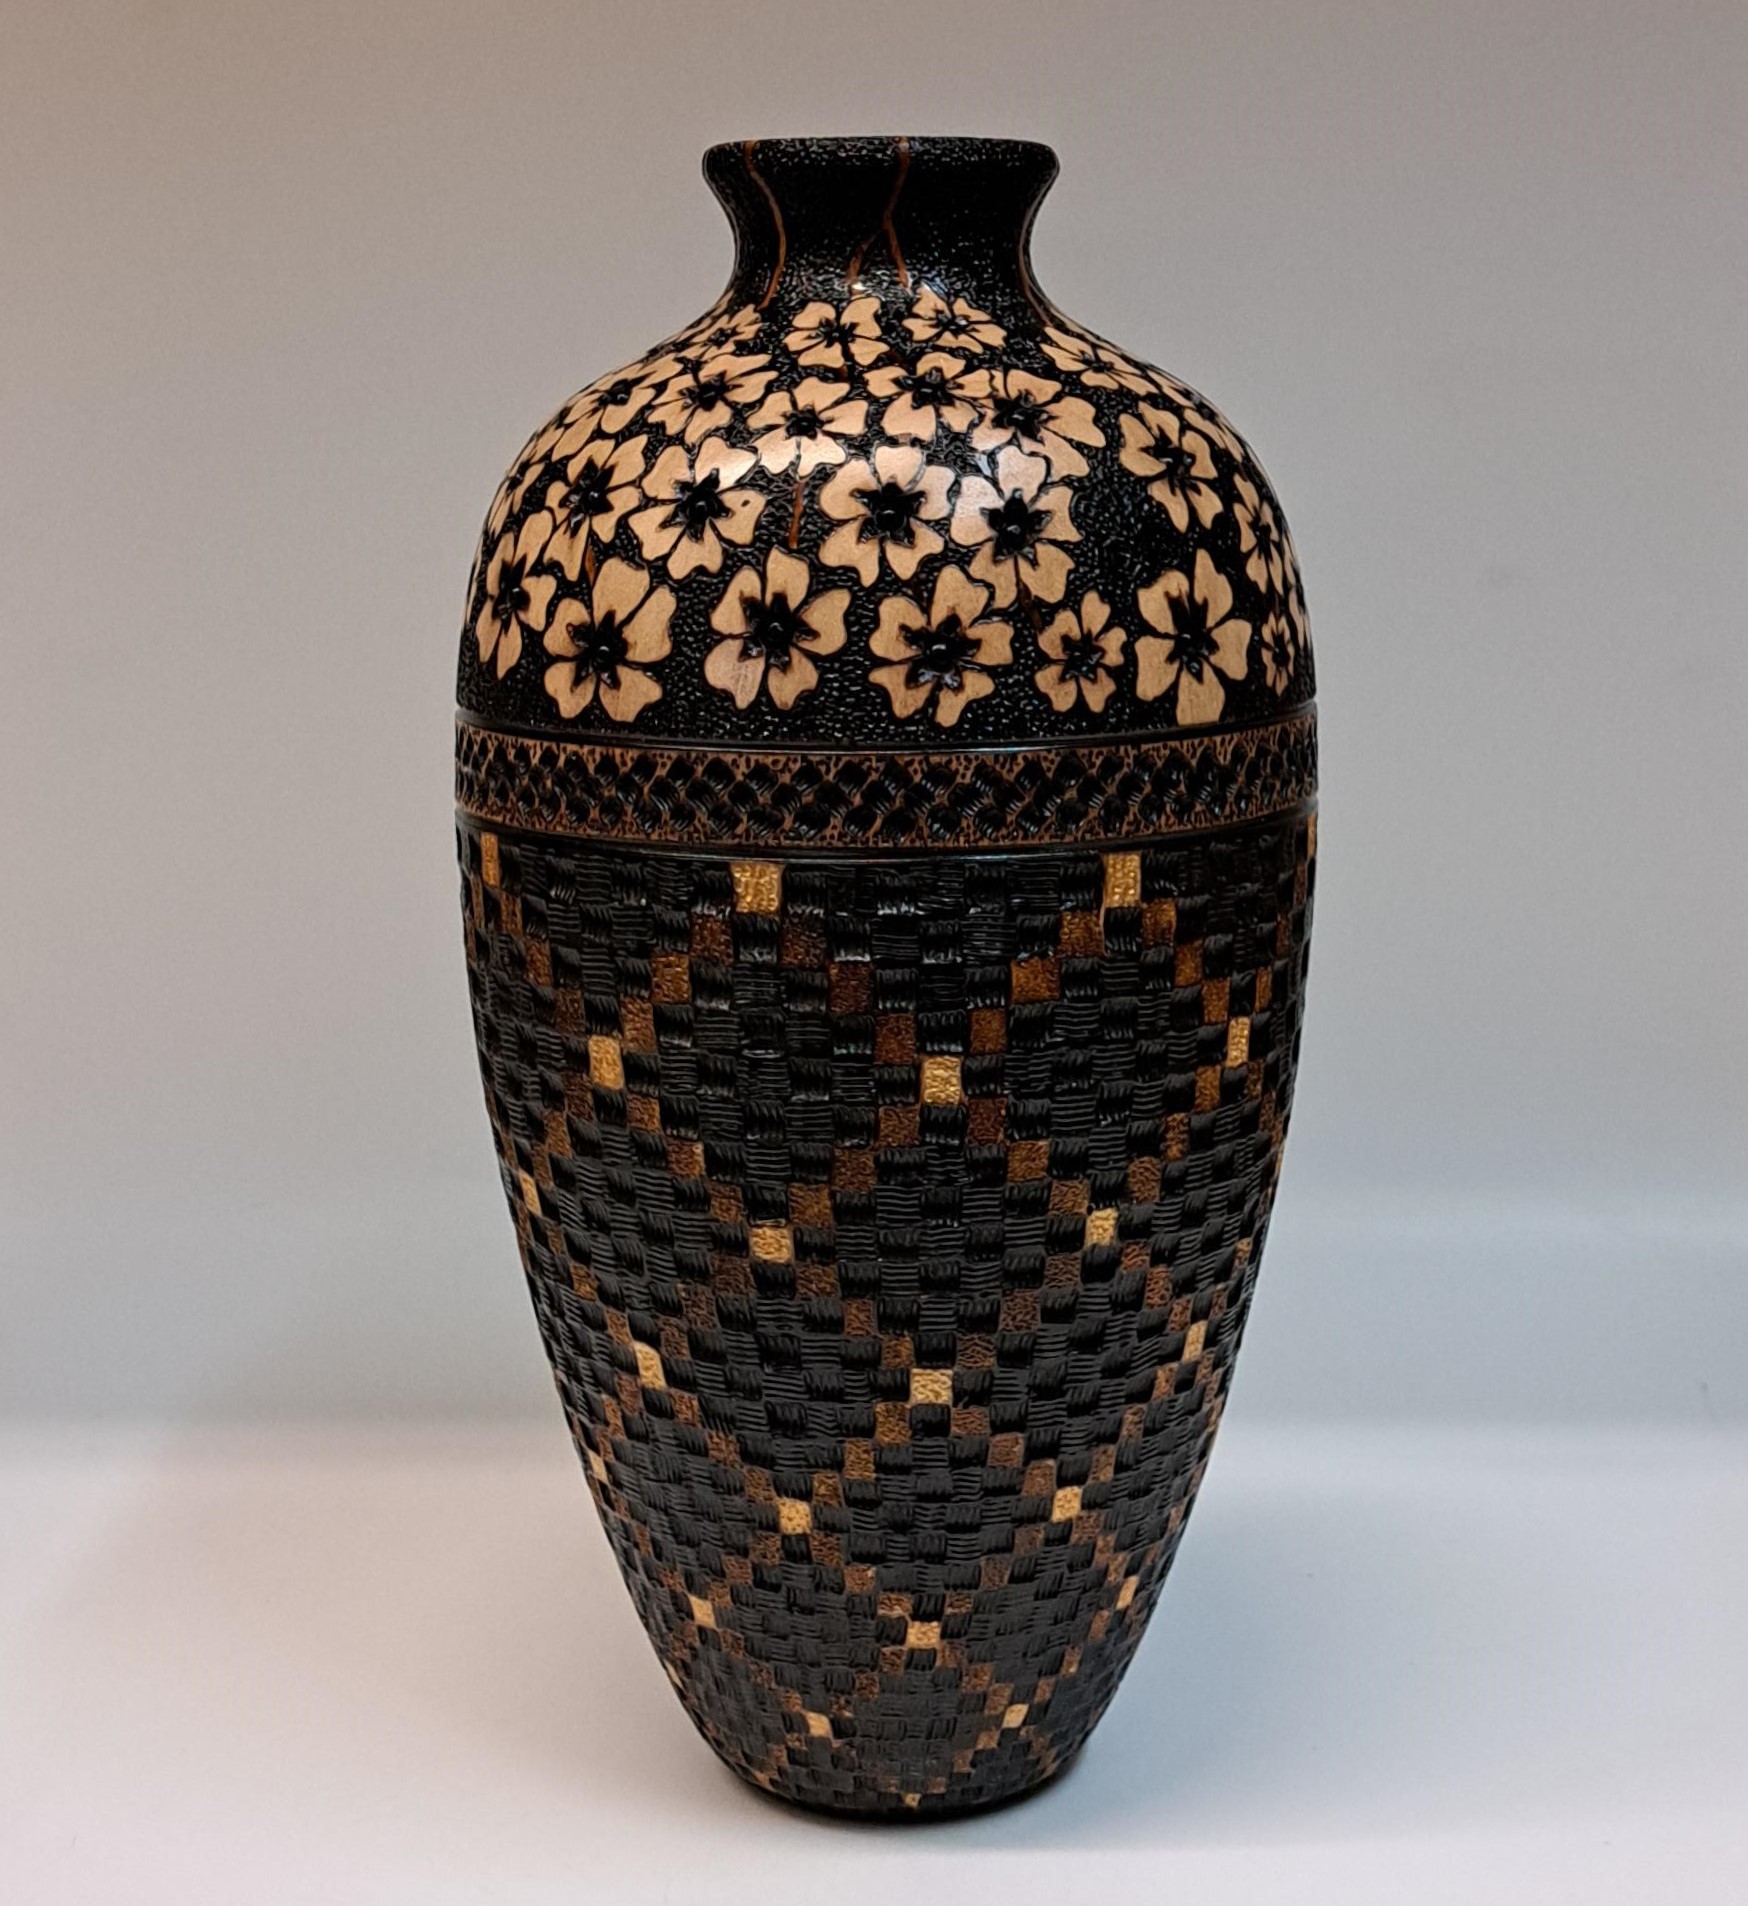 Click to view detail for VL-004 Vase, Flower Series  13x5.75 $1990